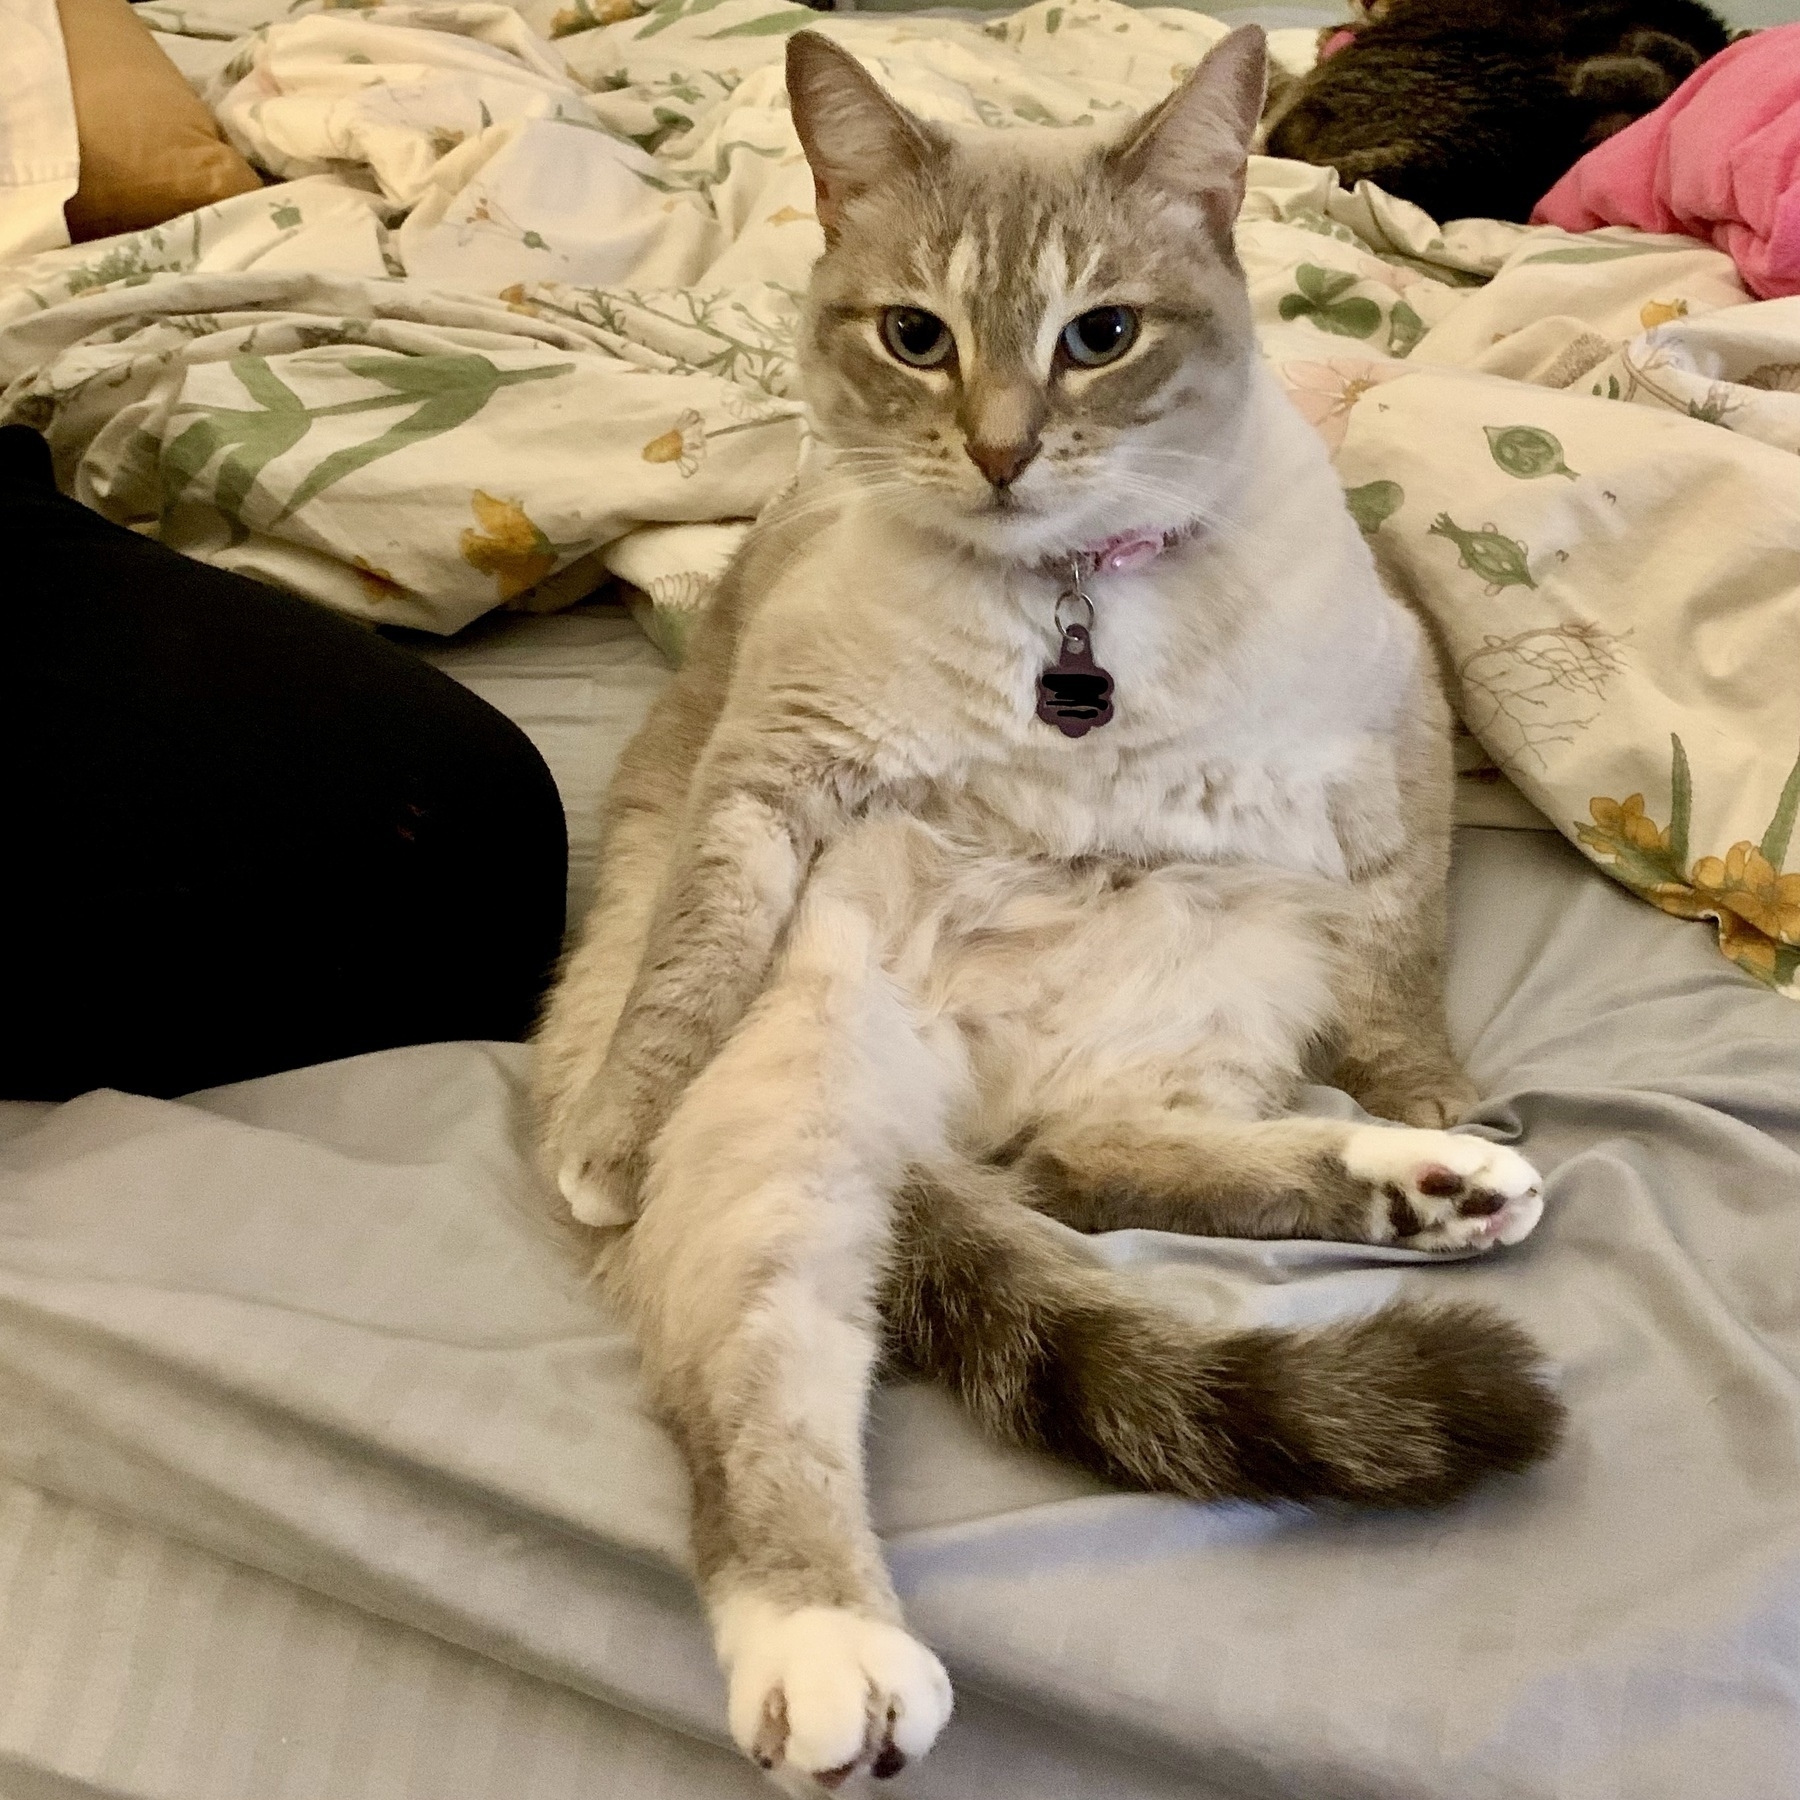 a cat sitting in an awkward position